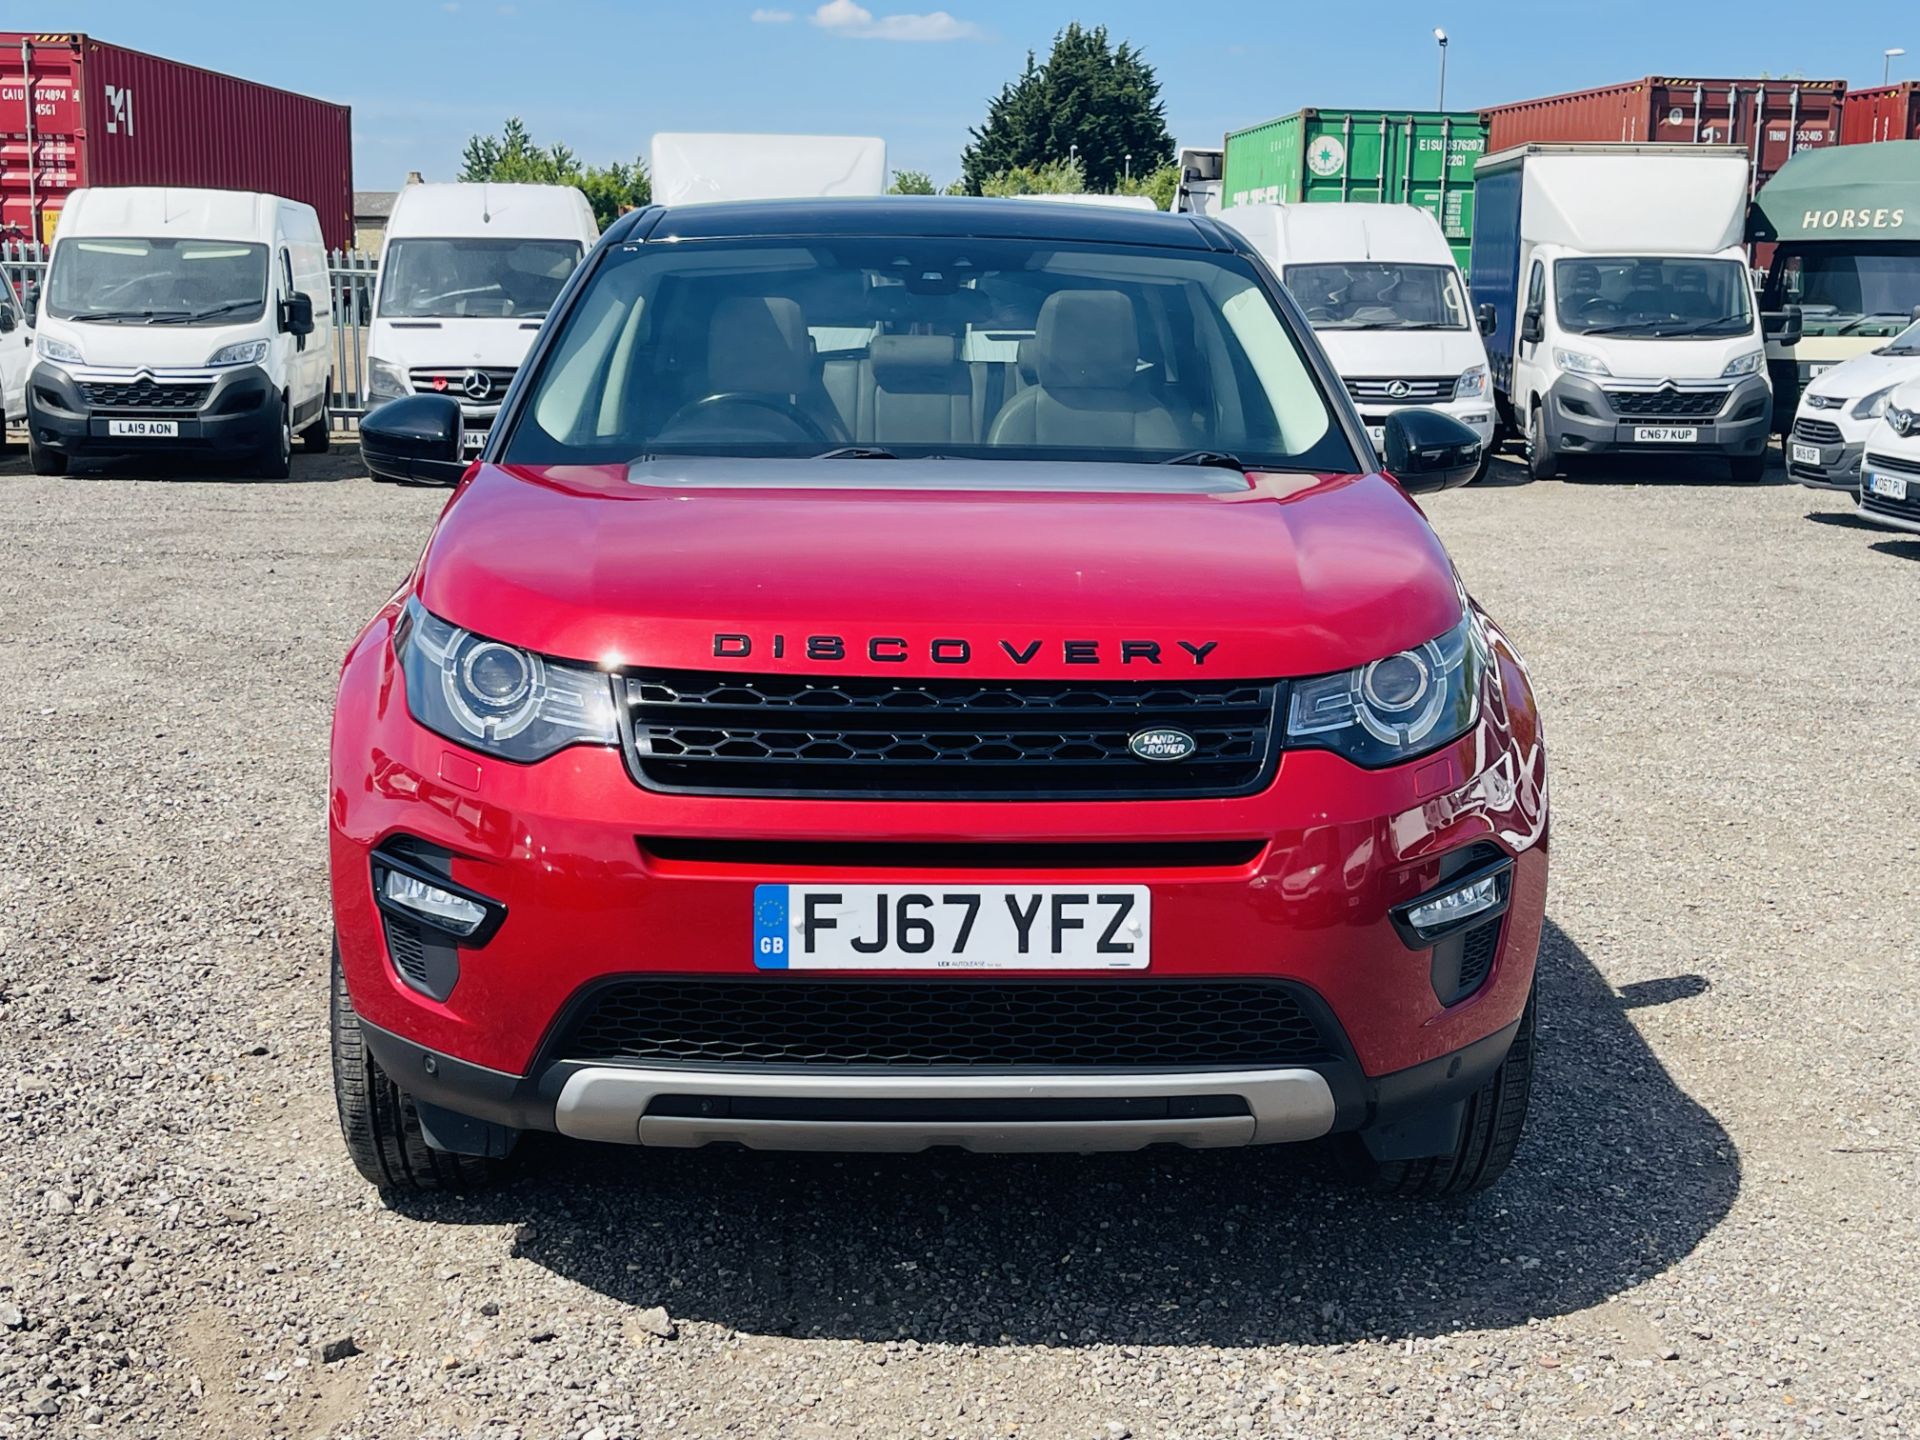 Land Rover Discovery Sport HSE 2.0 ED4 2017 '67 Reg' Sat Nav - Panoramic Glass Roof - ULEZ Compliant - Image 4 of 33